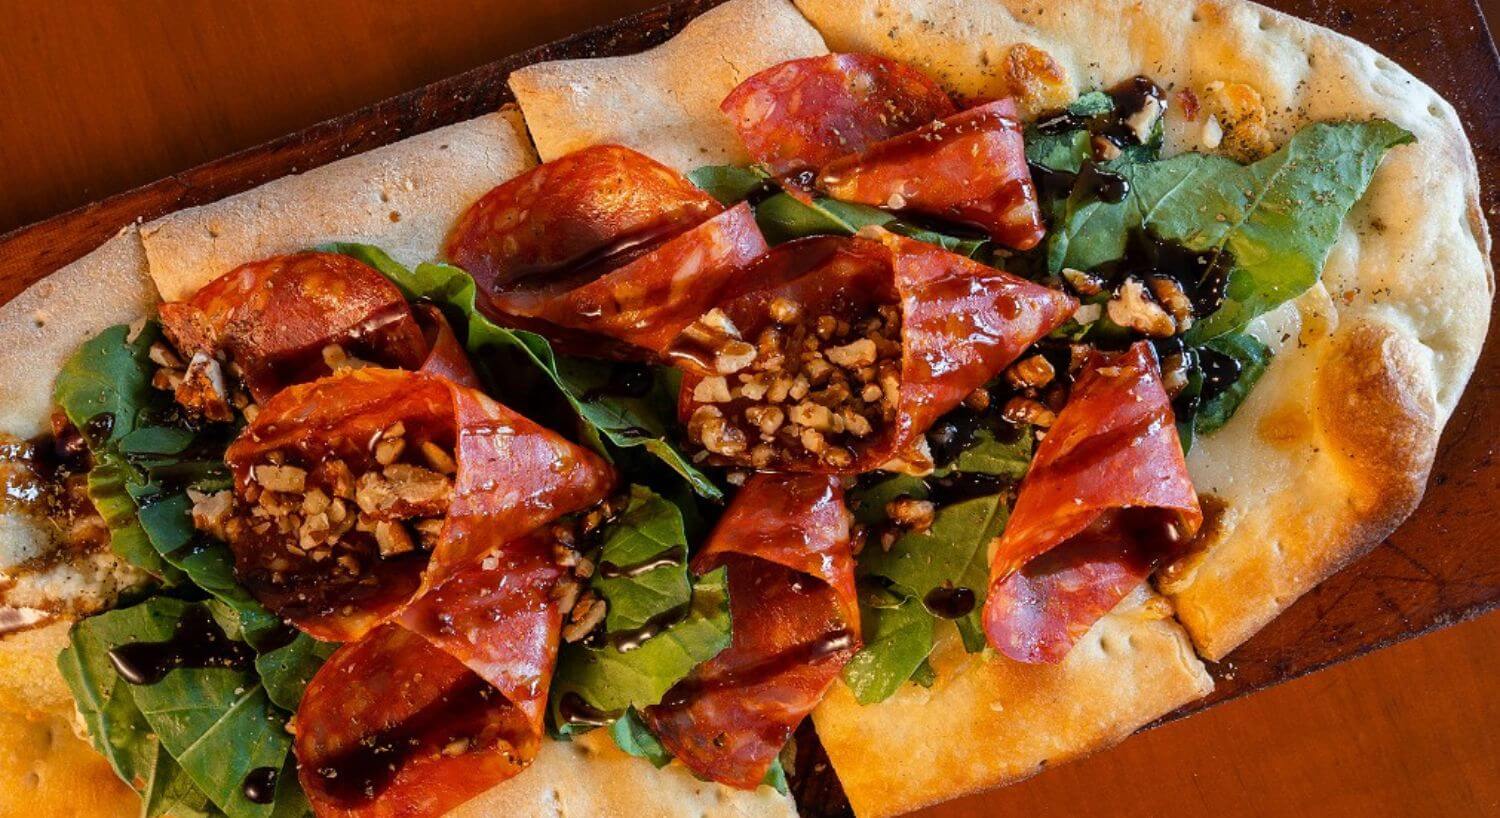 An oblong piece of flatbread cut into slices and topped with fresh basil leaves, slices of prosciutto, toasted njts, and drizzled with a balsamic glaze.